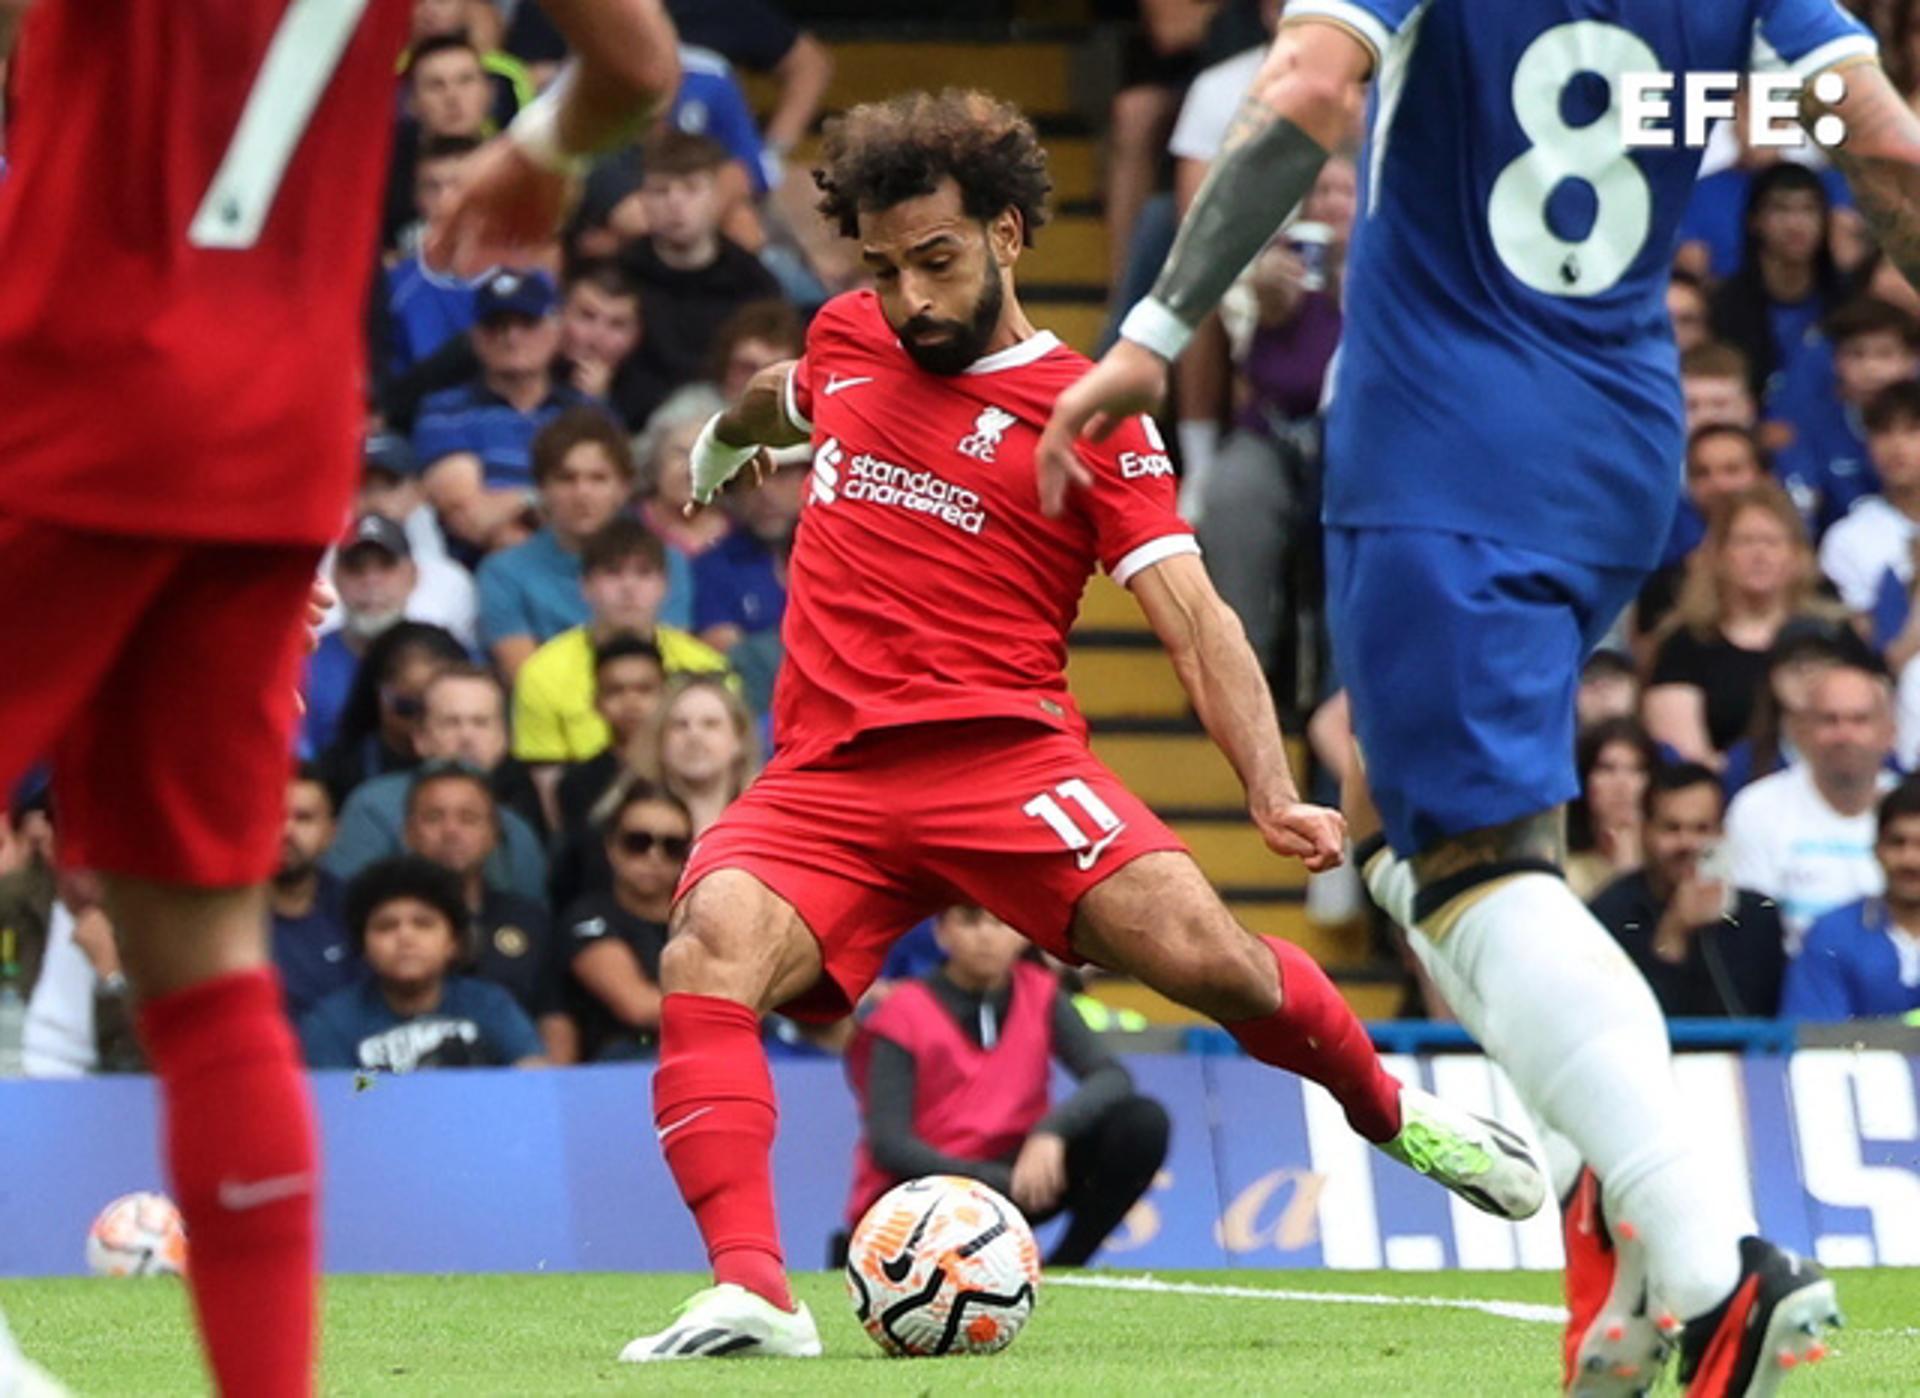 Liverpool's Mohamed Salah (C) in action against Chelsea during the Premier League match in London on 13 August 2023. EFE/EPA/NEIL HALL EDITORIAL USE ONLY. No use with unauthorized audio, video, data, fixture lists, club/league logos or 'live' services. Online in-match use limited to 120 images, no video emulation. No use in betting, games or single club/league/player publications
